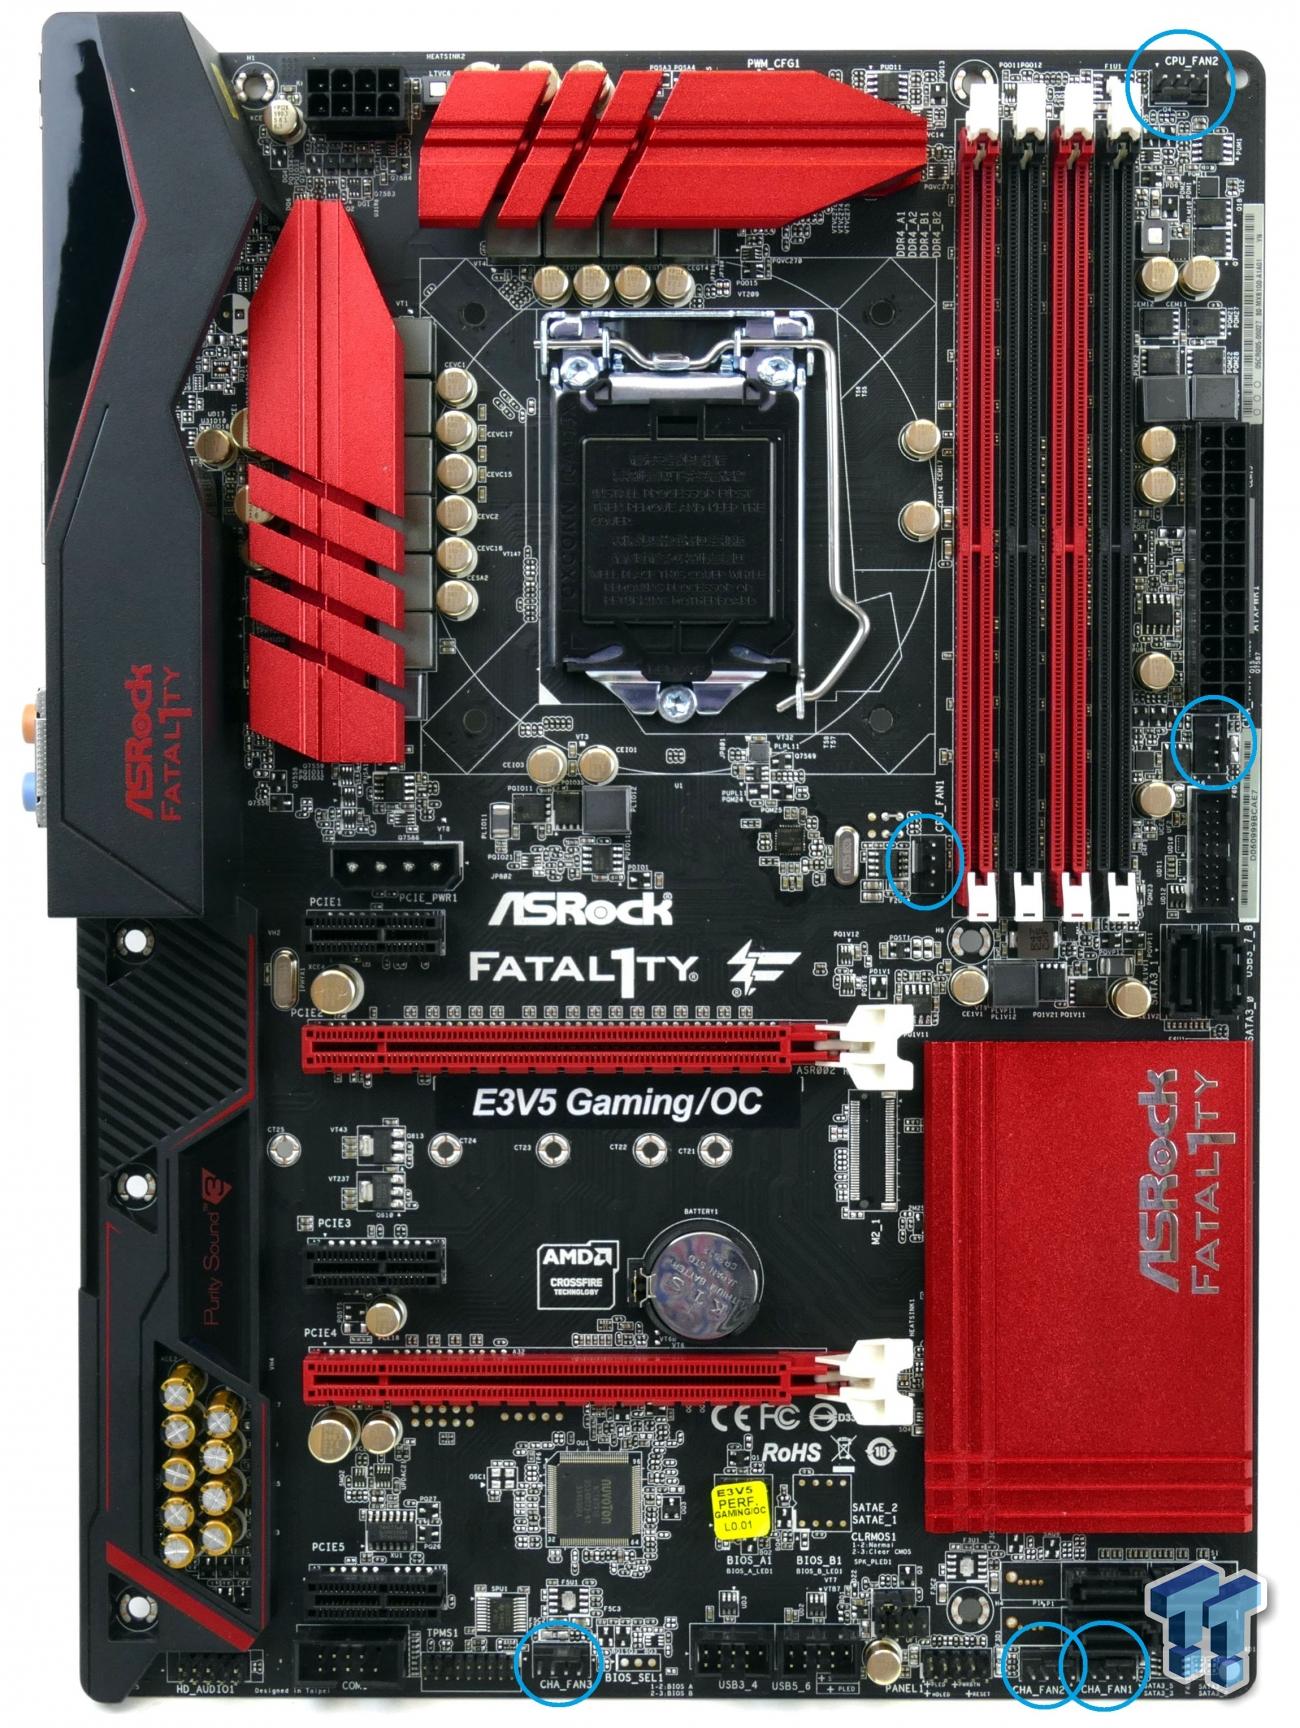 threshold When Are familiar ASRock Fatal1ty E3V5 Gaming/OC (Intel C232) Motherboard Review | TweakTown